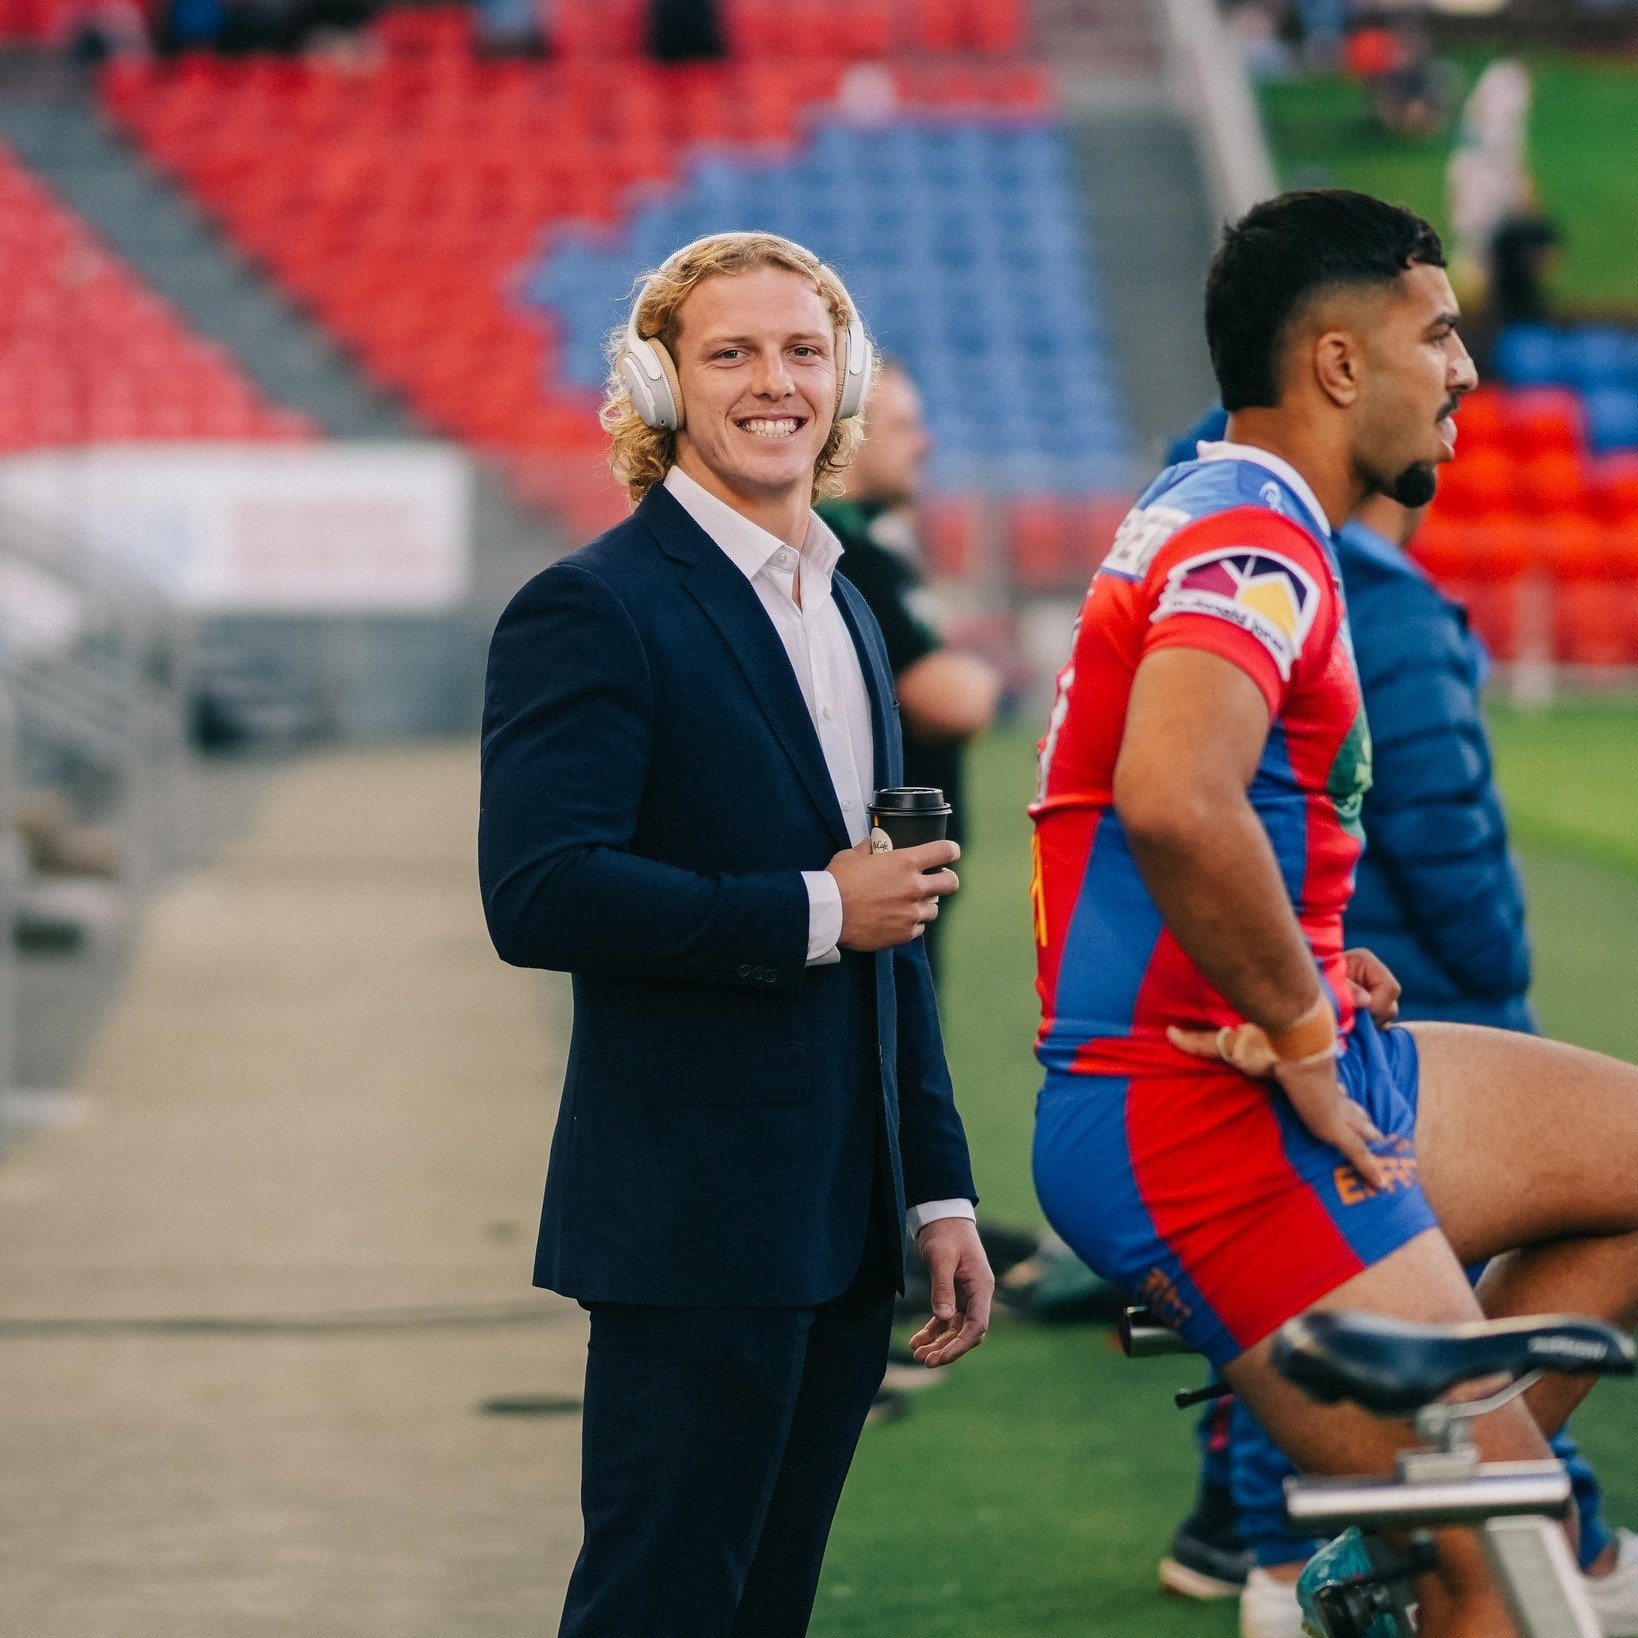 Sideline style @nrlknights 🤩

#suiting #shirting #uniforms